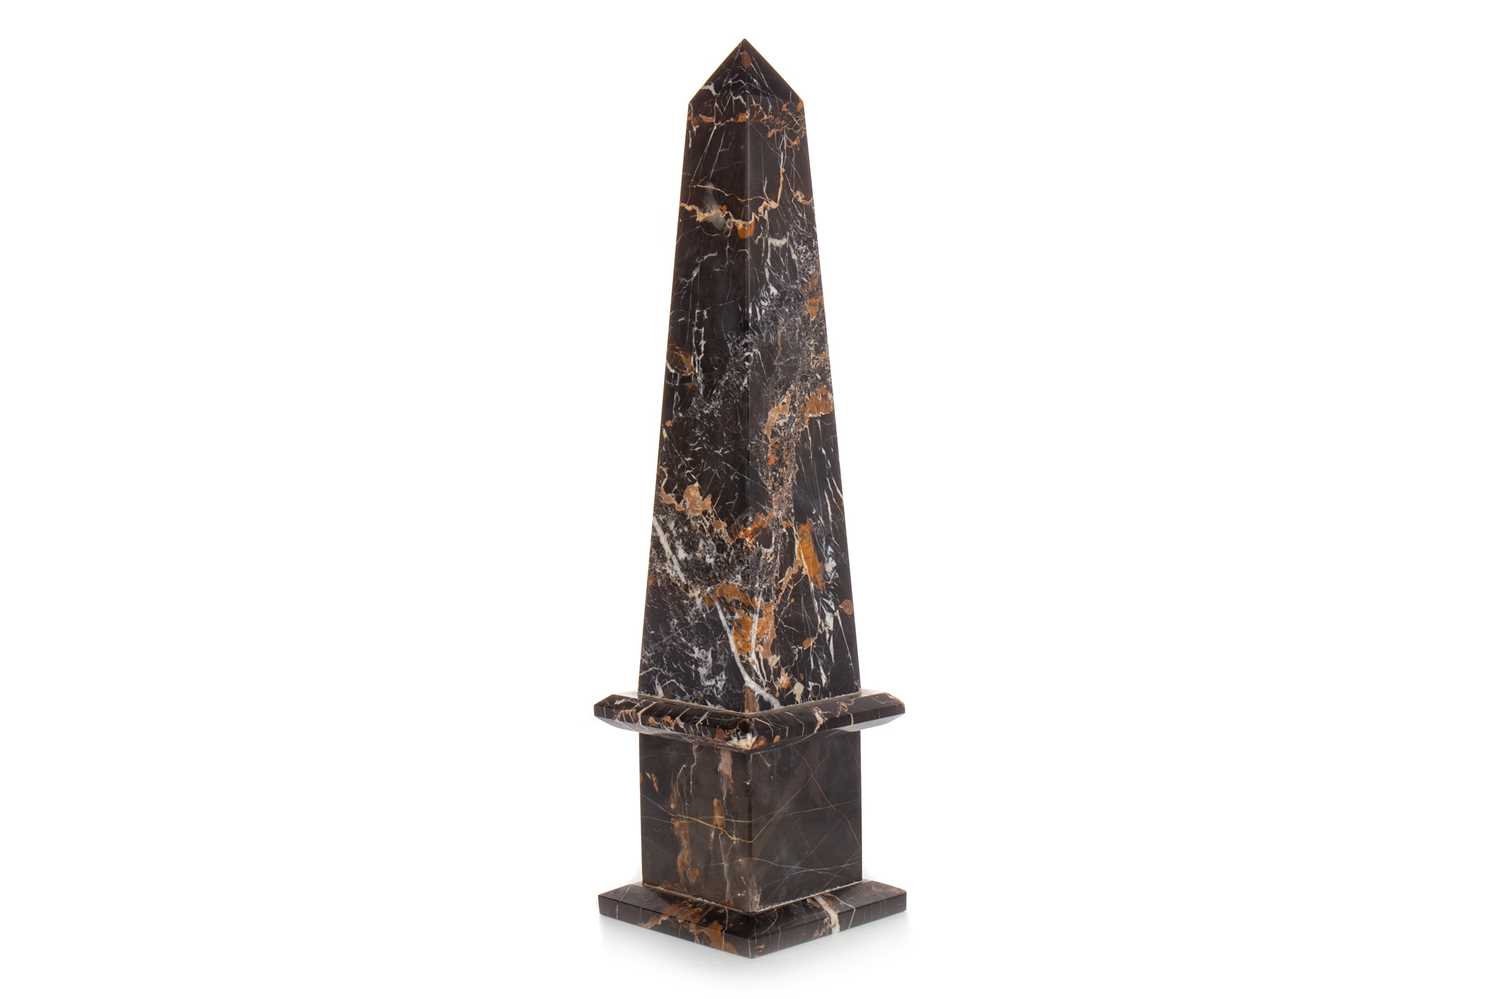 VEINED BLACK MARBLE OBELISK, LATE 19TH / EARLY 20TH CENTURY